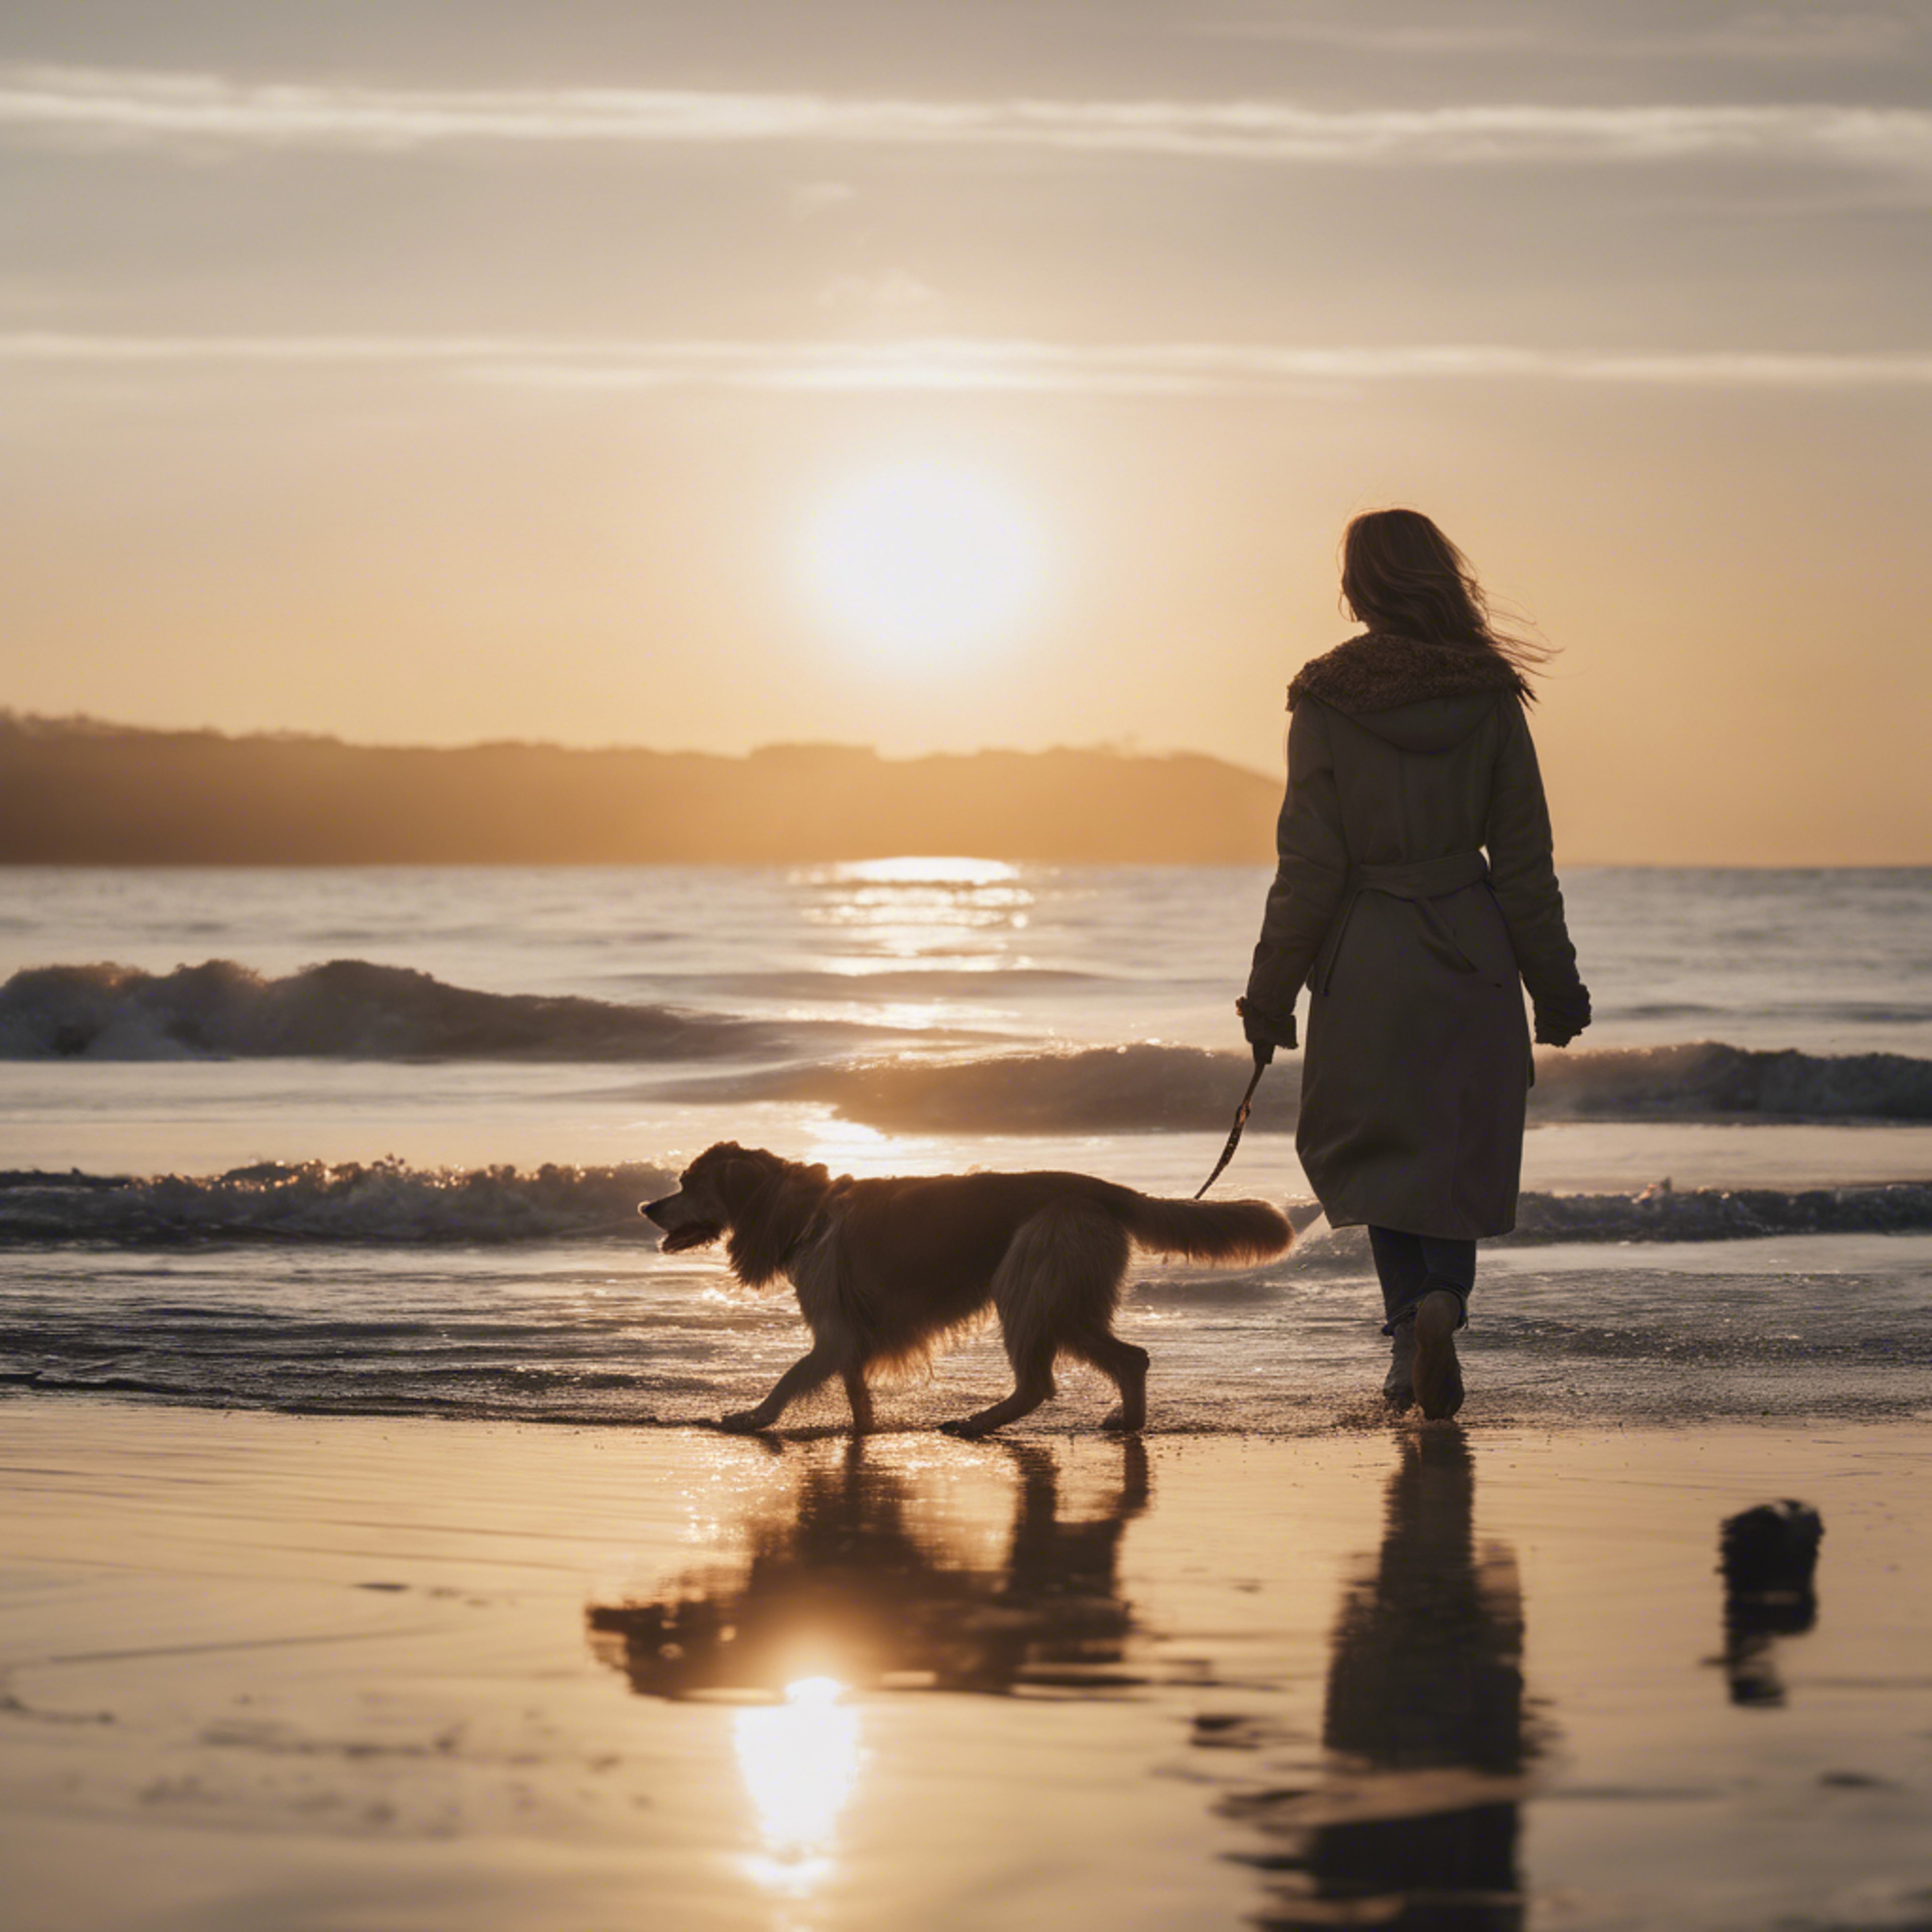 A beach scene with a woman walking her enthusiastic dog along the water's edge at sunset.壁紙[f9bc2ab3990f4caba062]